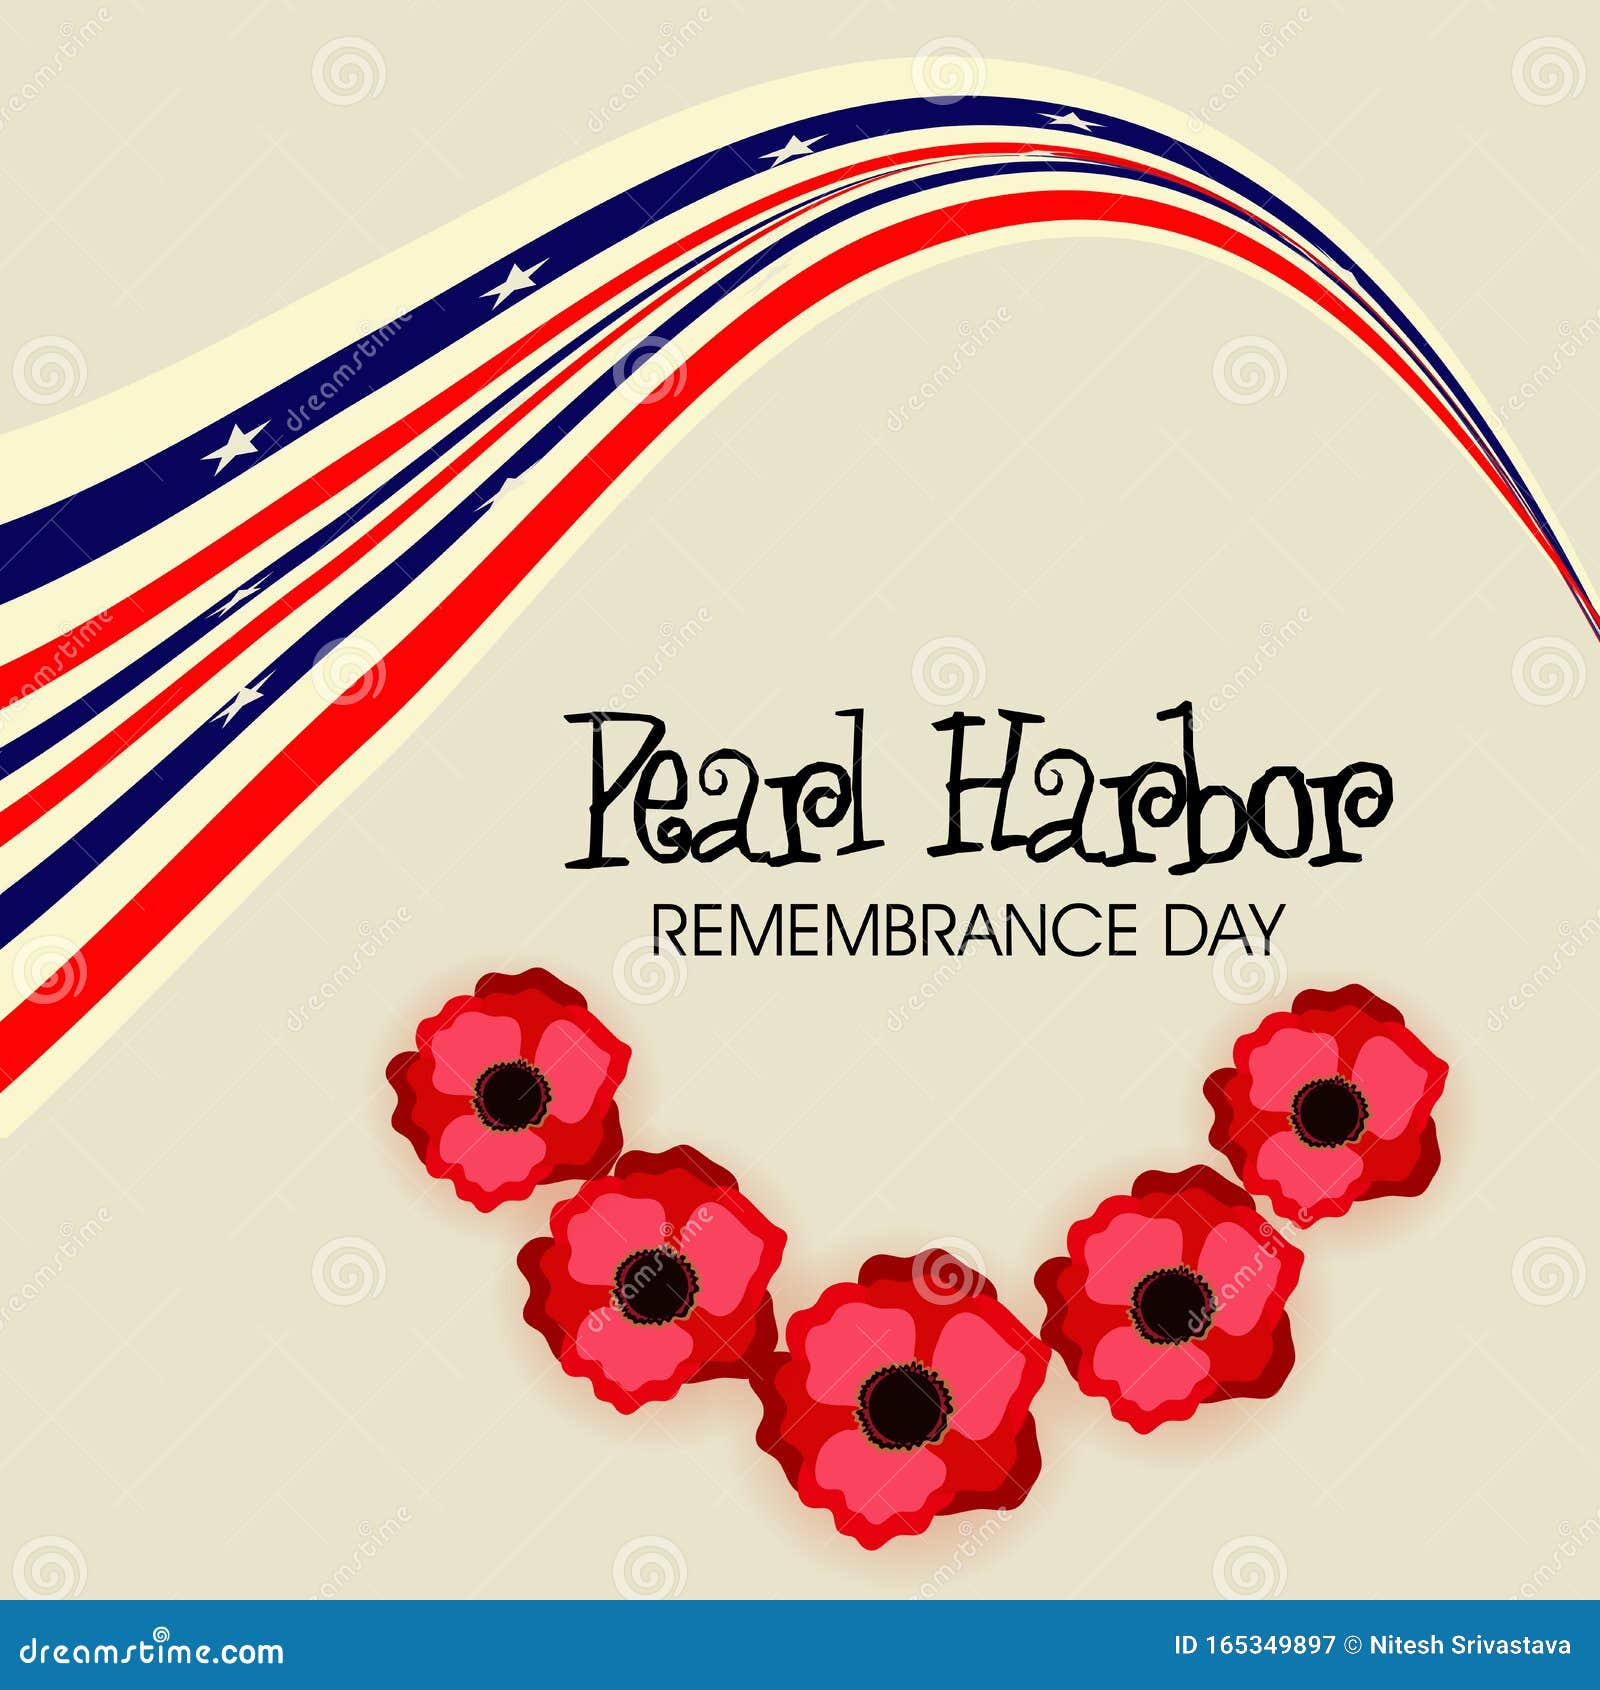 national pearl harbor remembrance day clipart